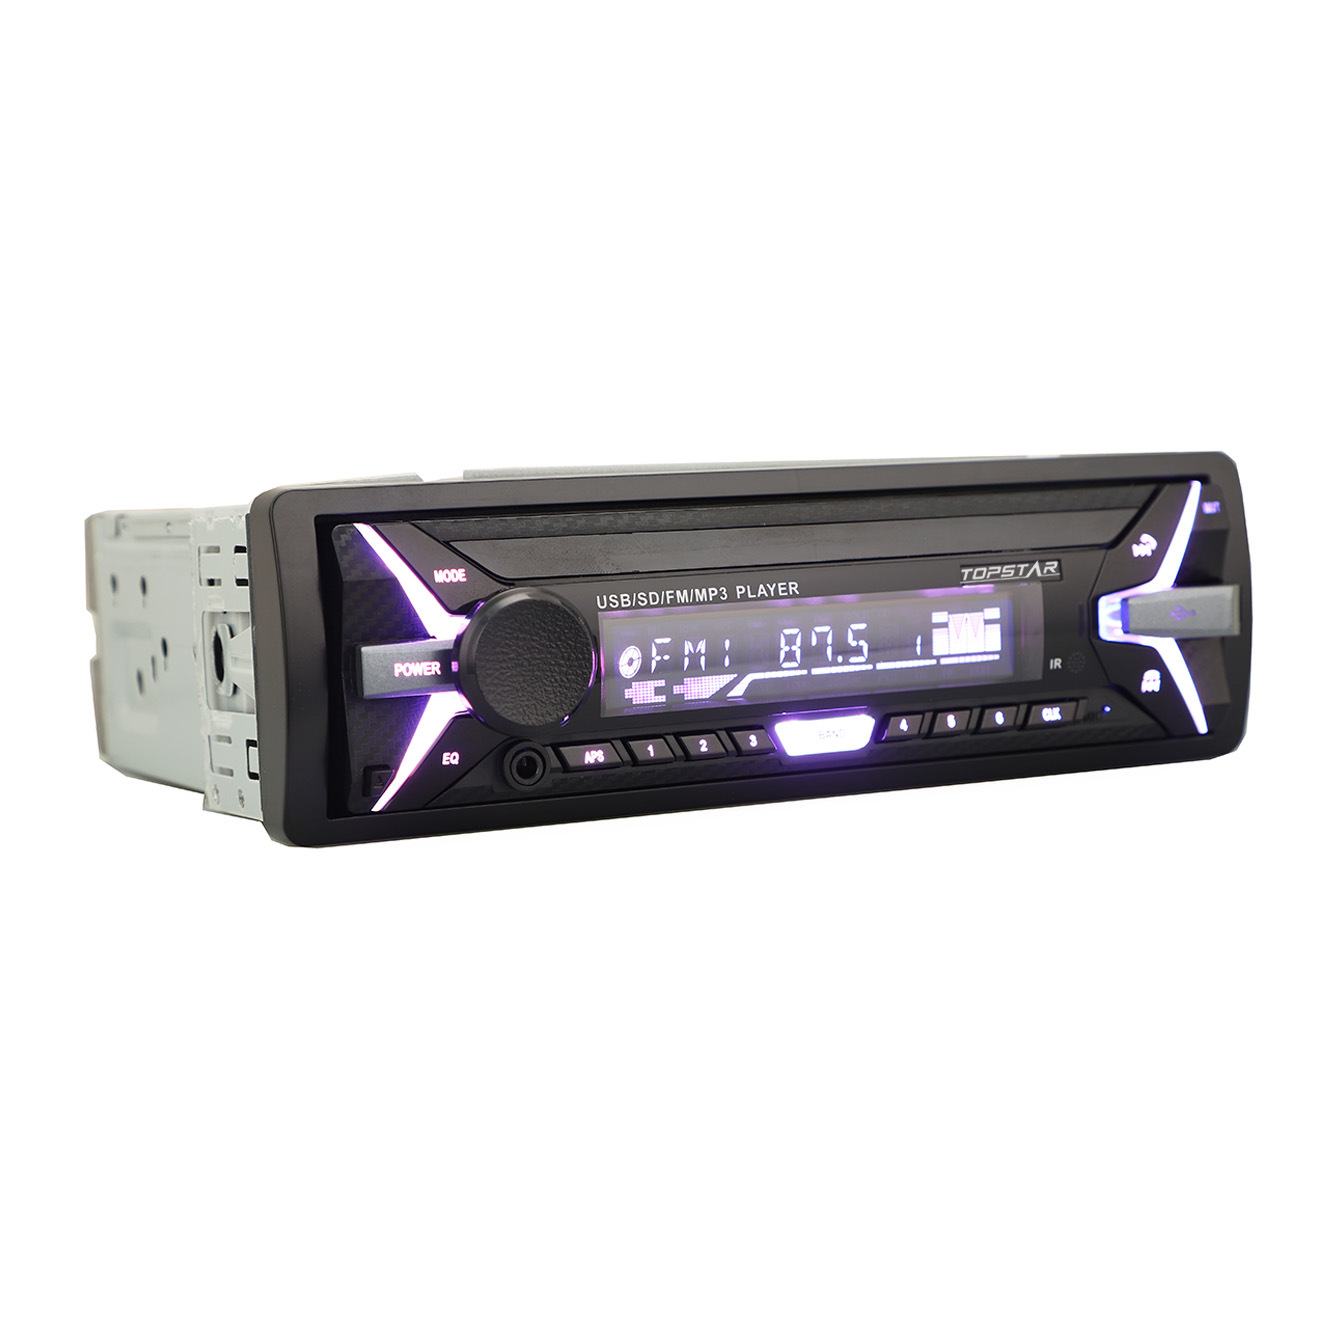 MP3 on Car Car MP3 Player LCD Display Single DIN Stereo Car LCD Player